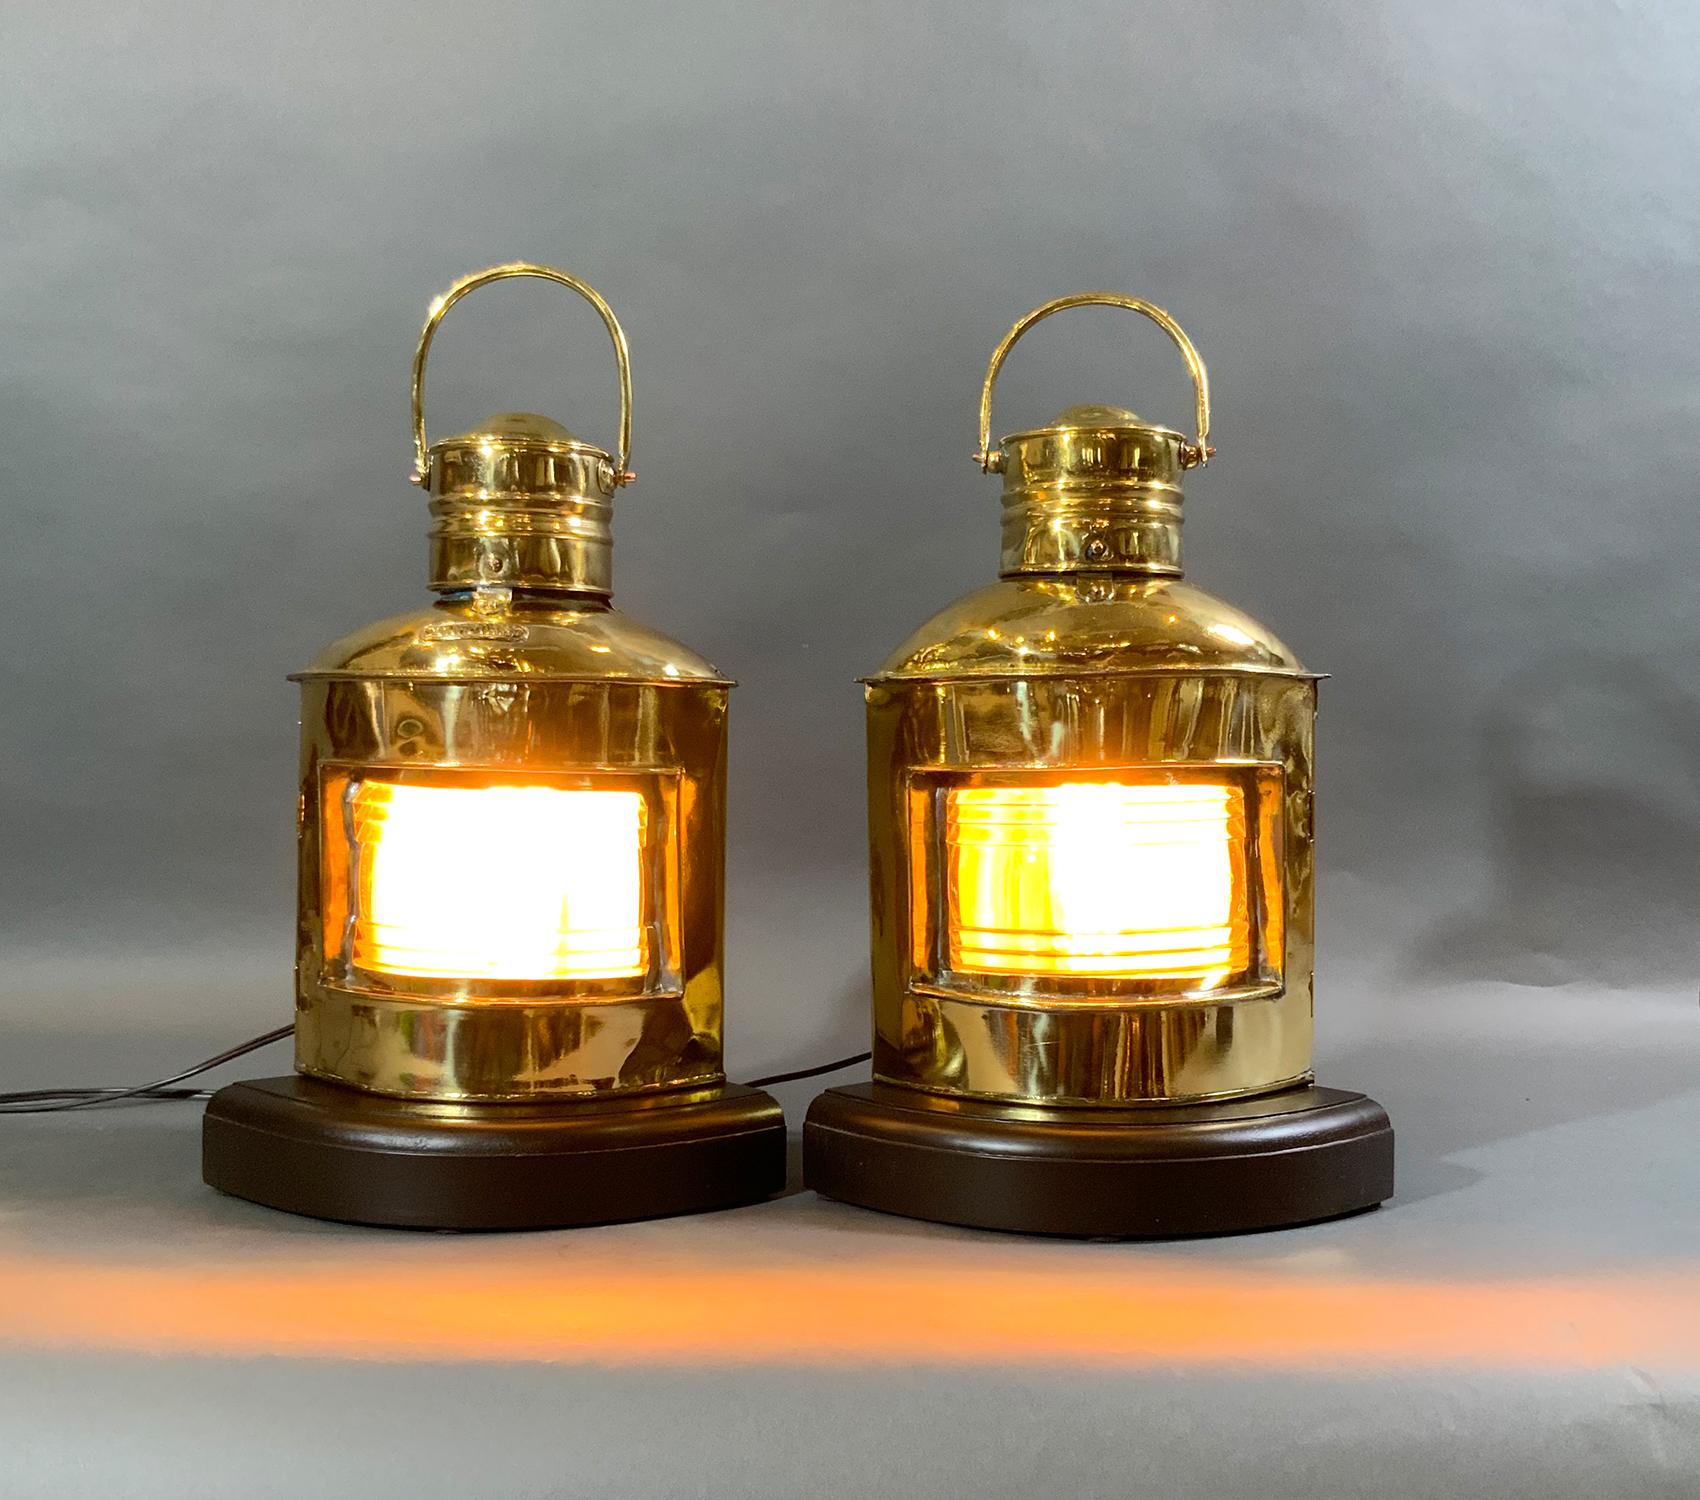 Highly polished and lacquered solid brass ships lantern with clear glass lenses. Lacking colored red and green filters. Mounted to thick mahogany bases. Wire with new sockets and cords.

Weight: 6 LBS
Overall Dimensions: 15” H x 11” L x 9”